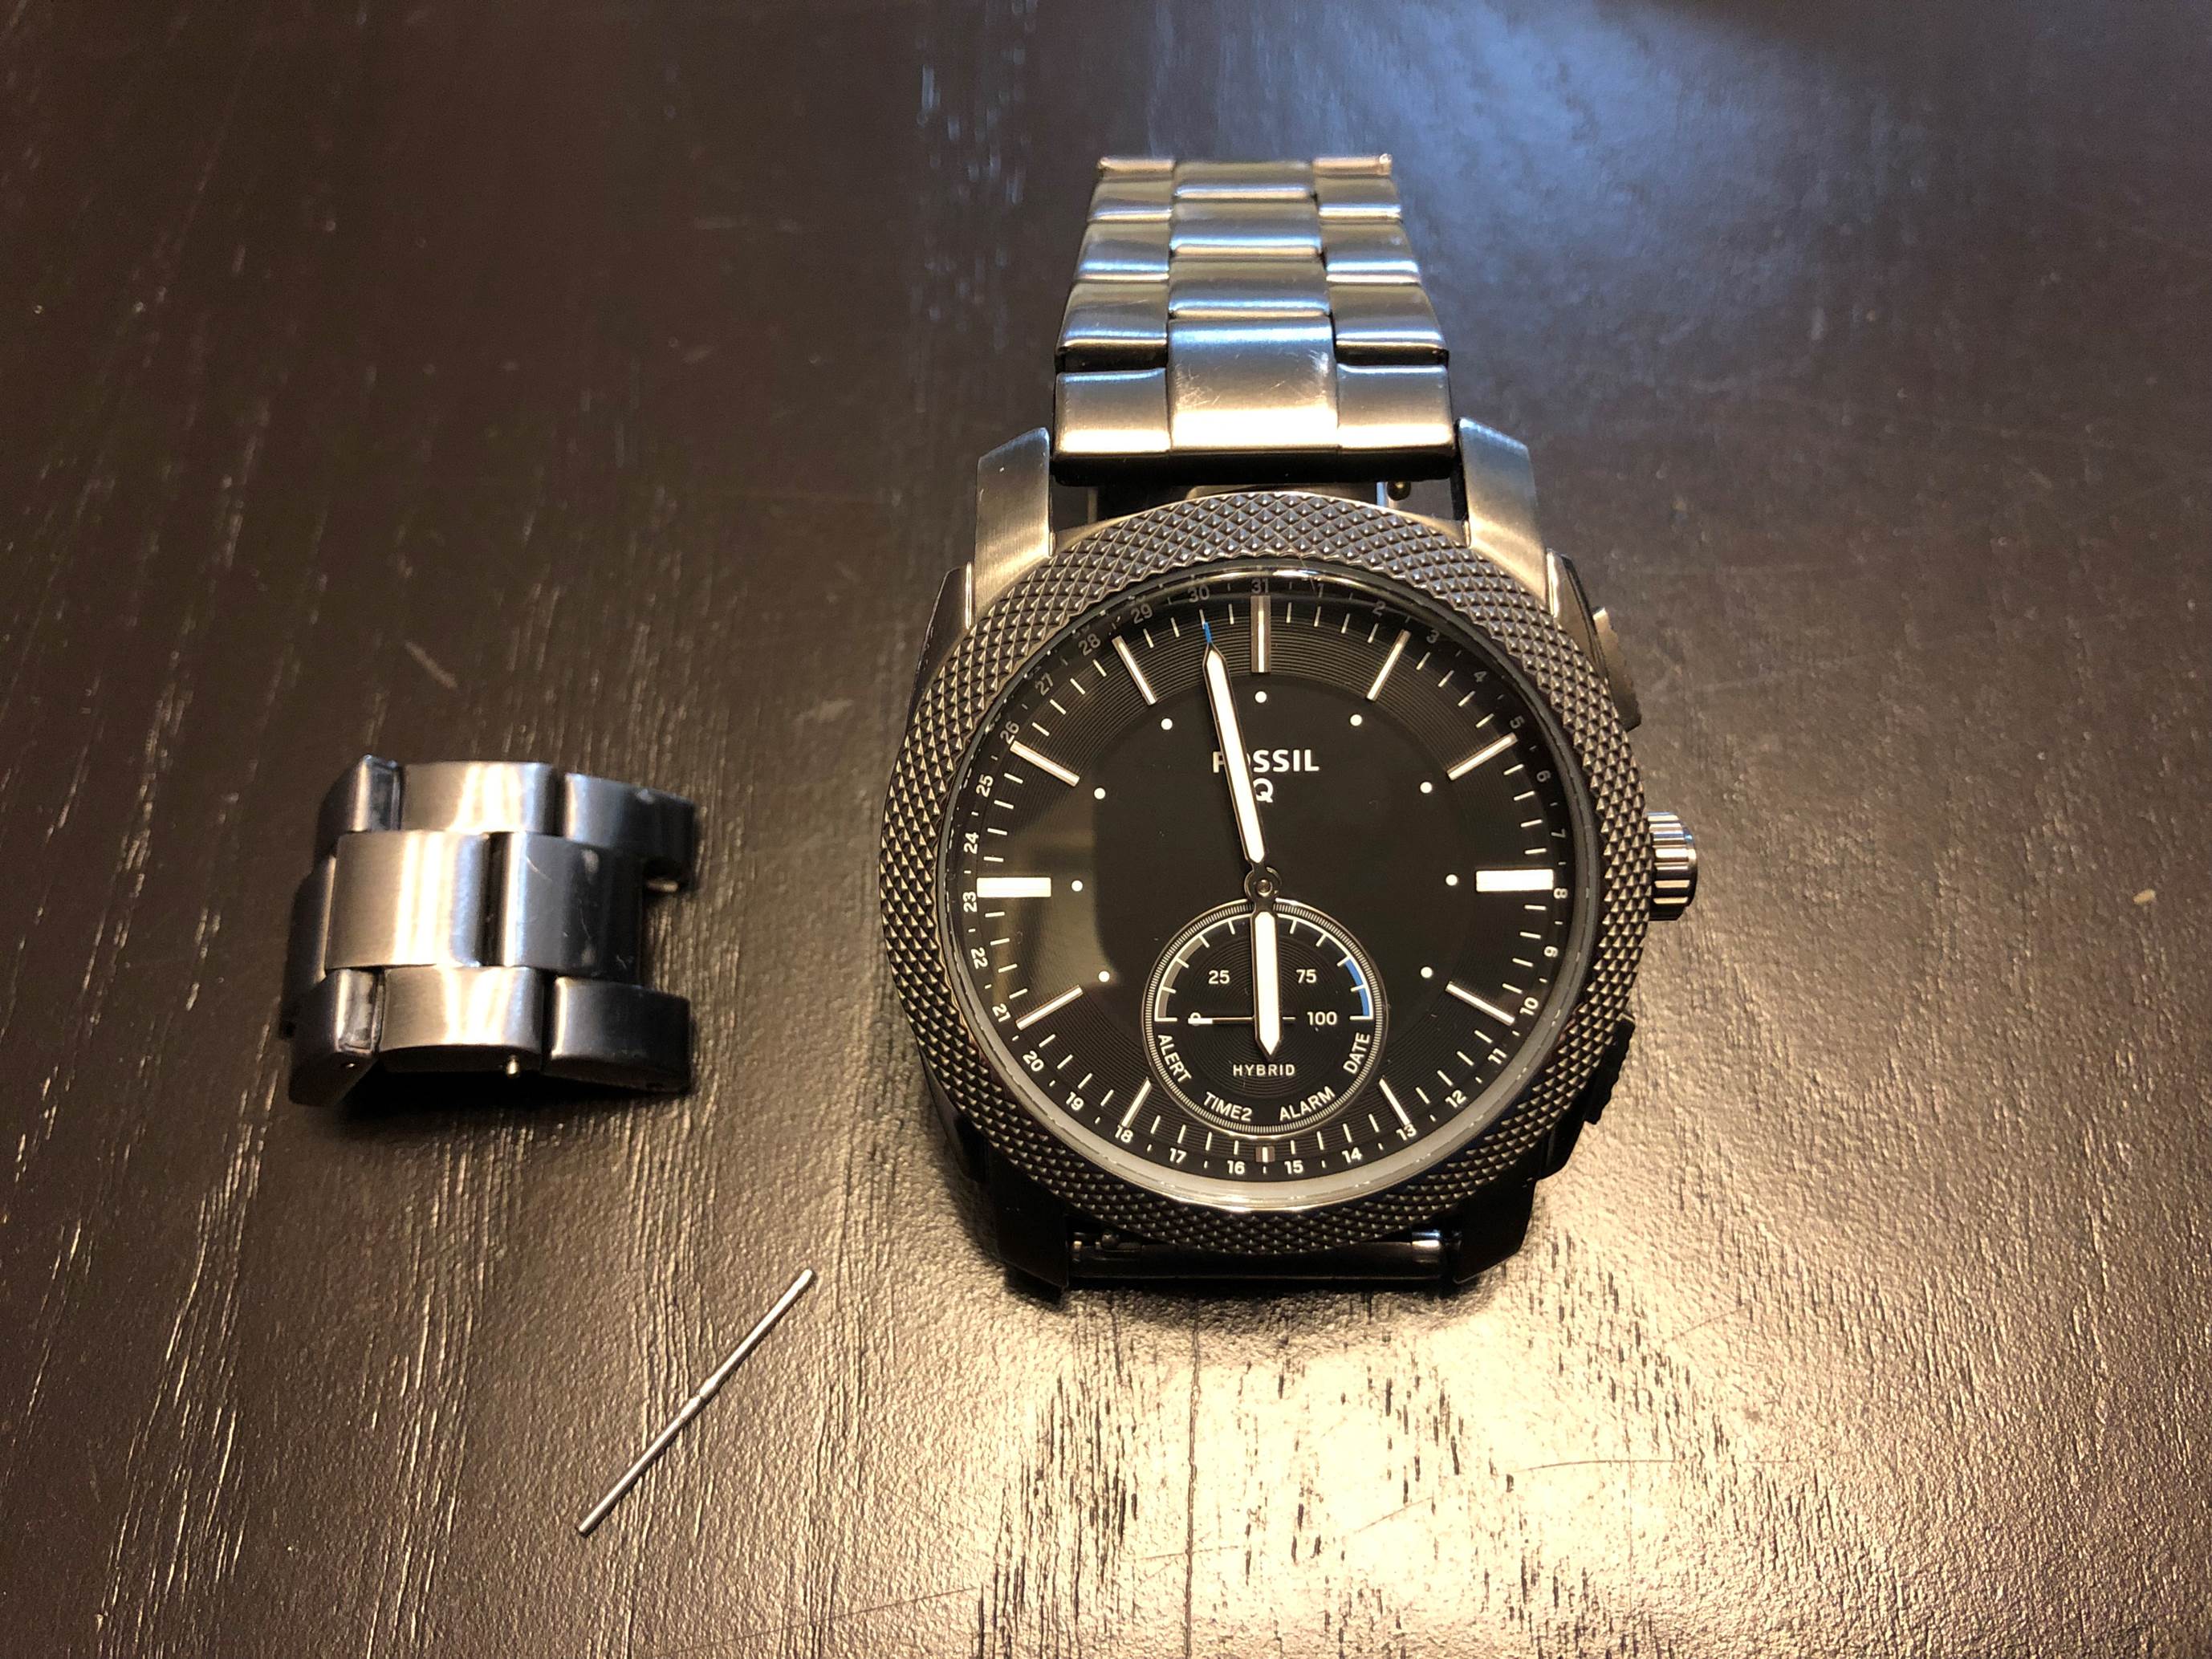 How To Resize A Watch Strap, Make It Larger Or Smaller